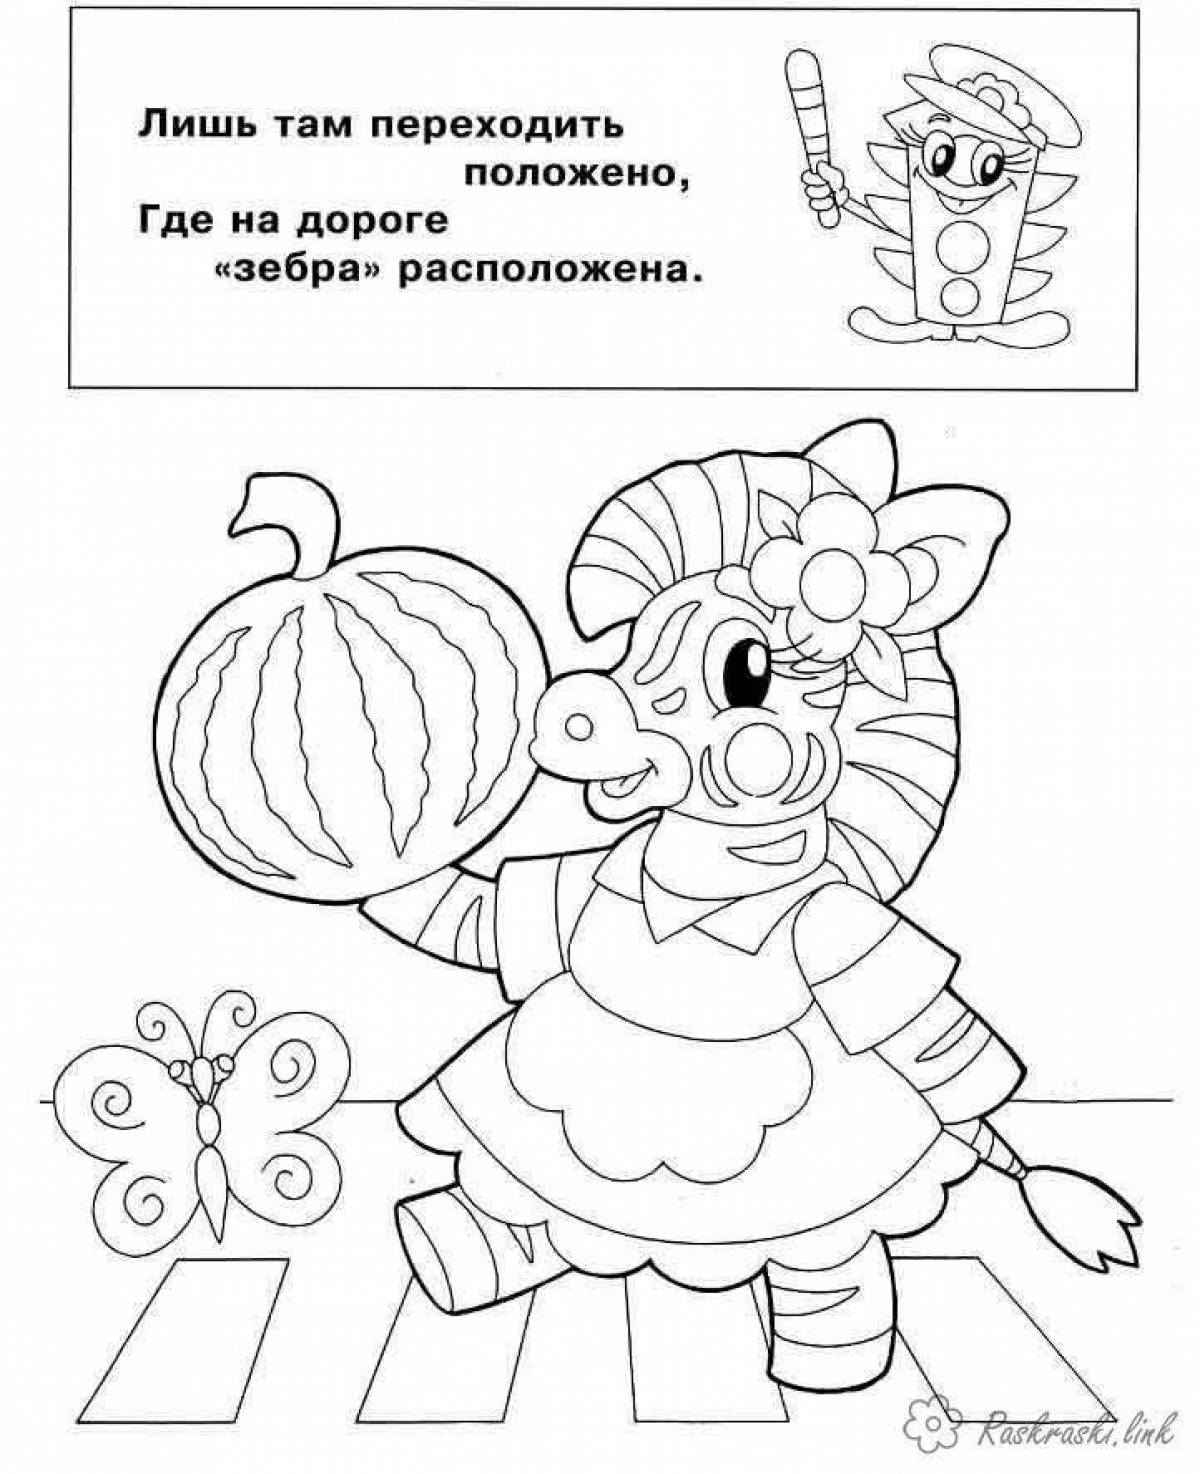 Funny traffic rules coloring page for little ones